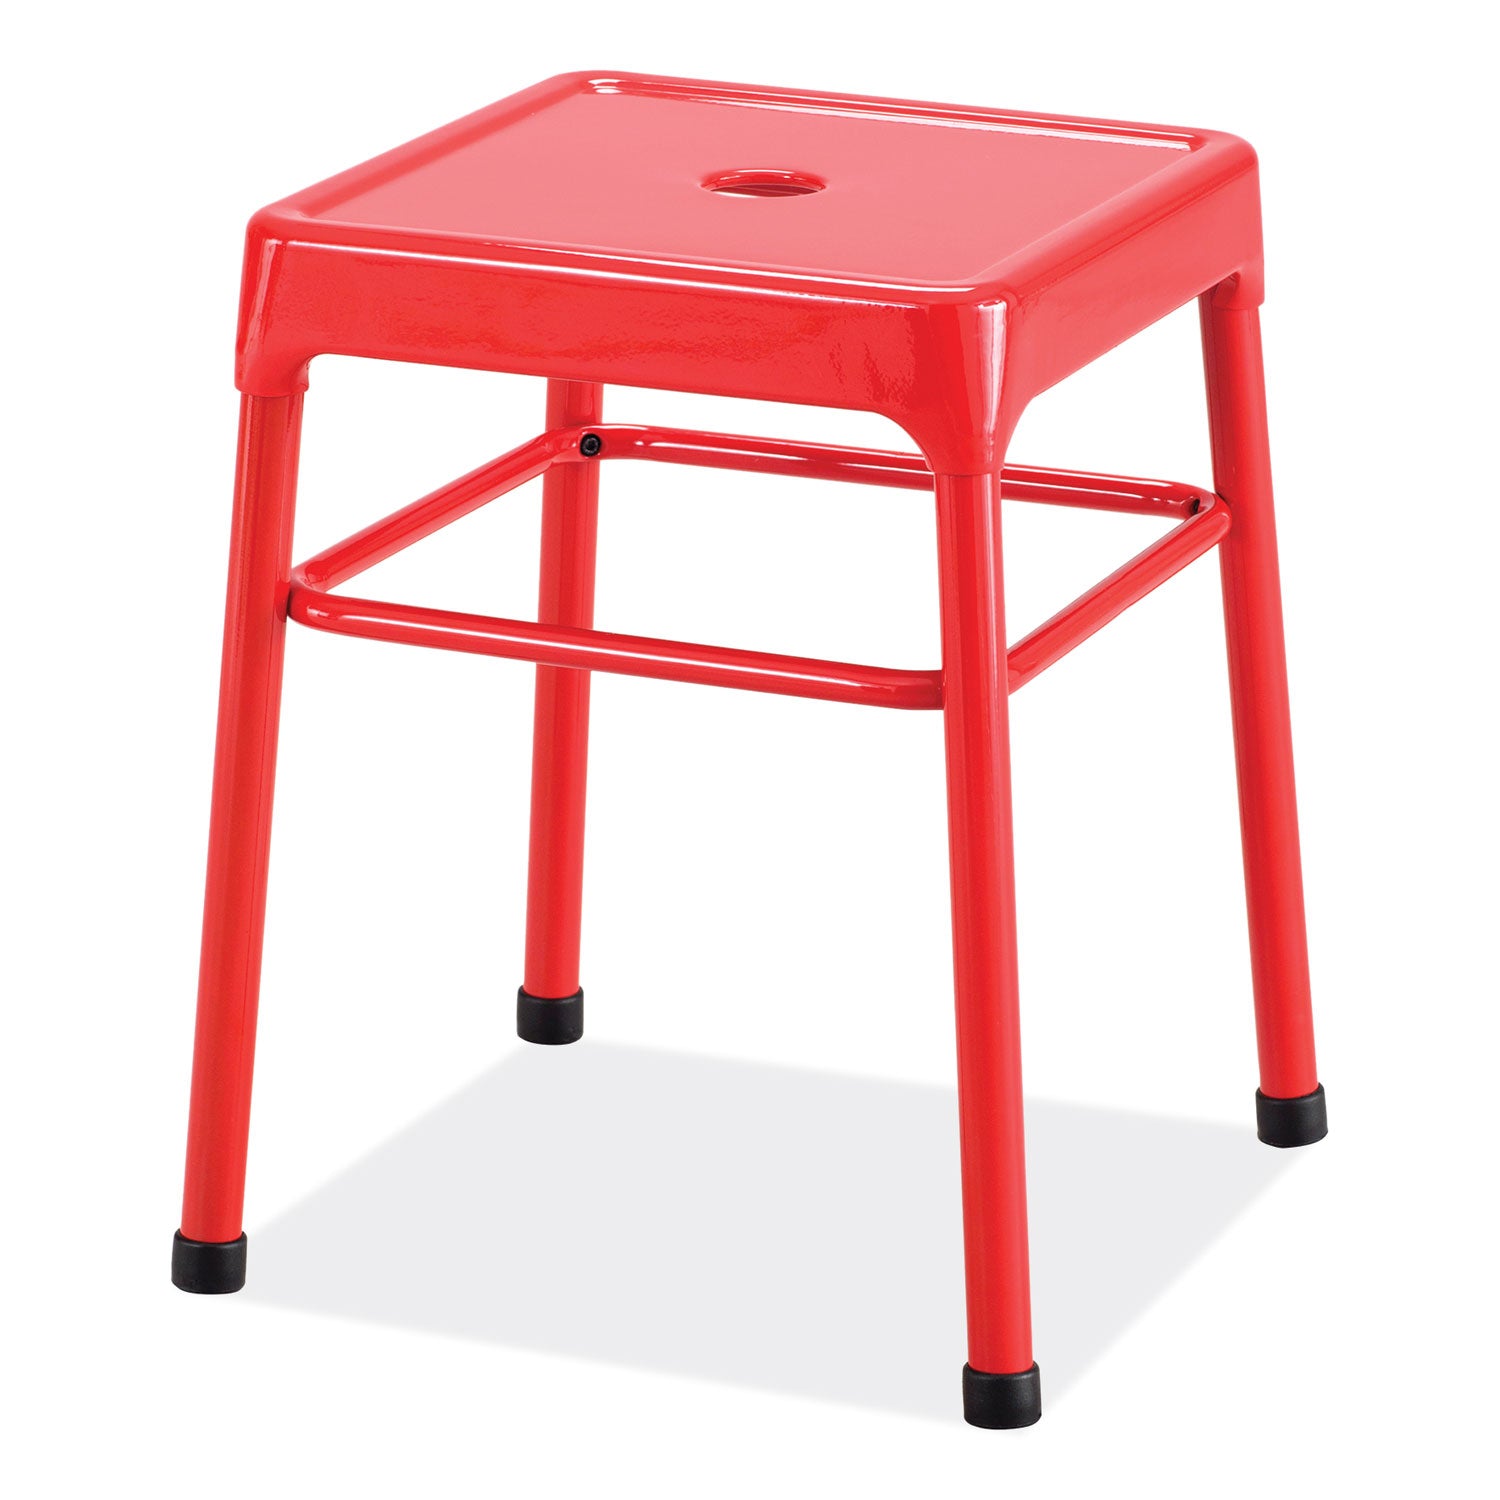 steel-guestbistro-stool-backless-supports-up-to-250-lb-18-seat-height-red-seat-red-base-ships-in-1-3-business-days_saf6604rd - 1